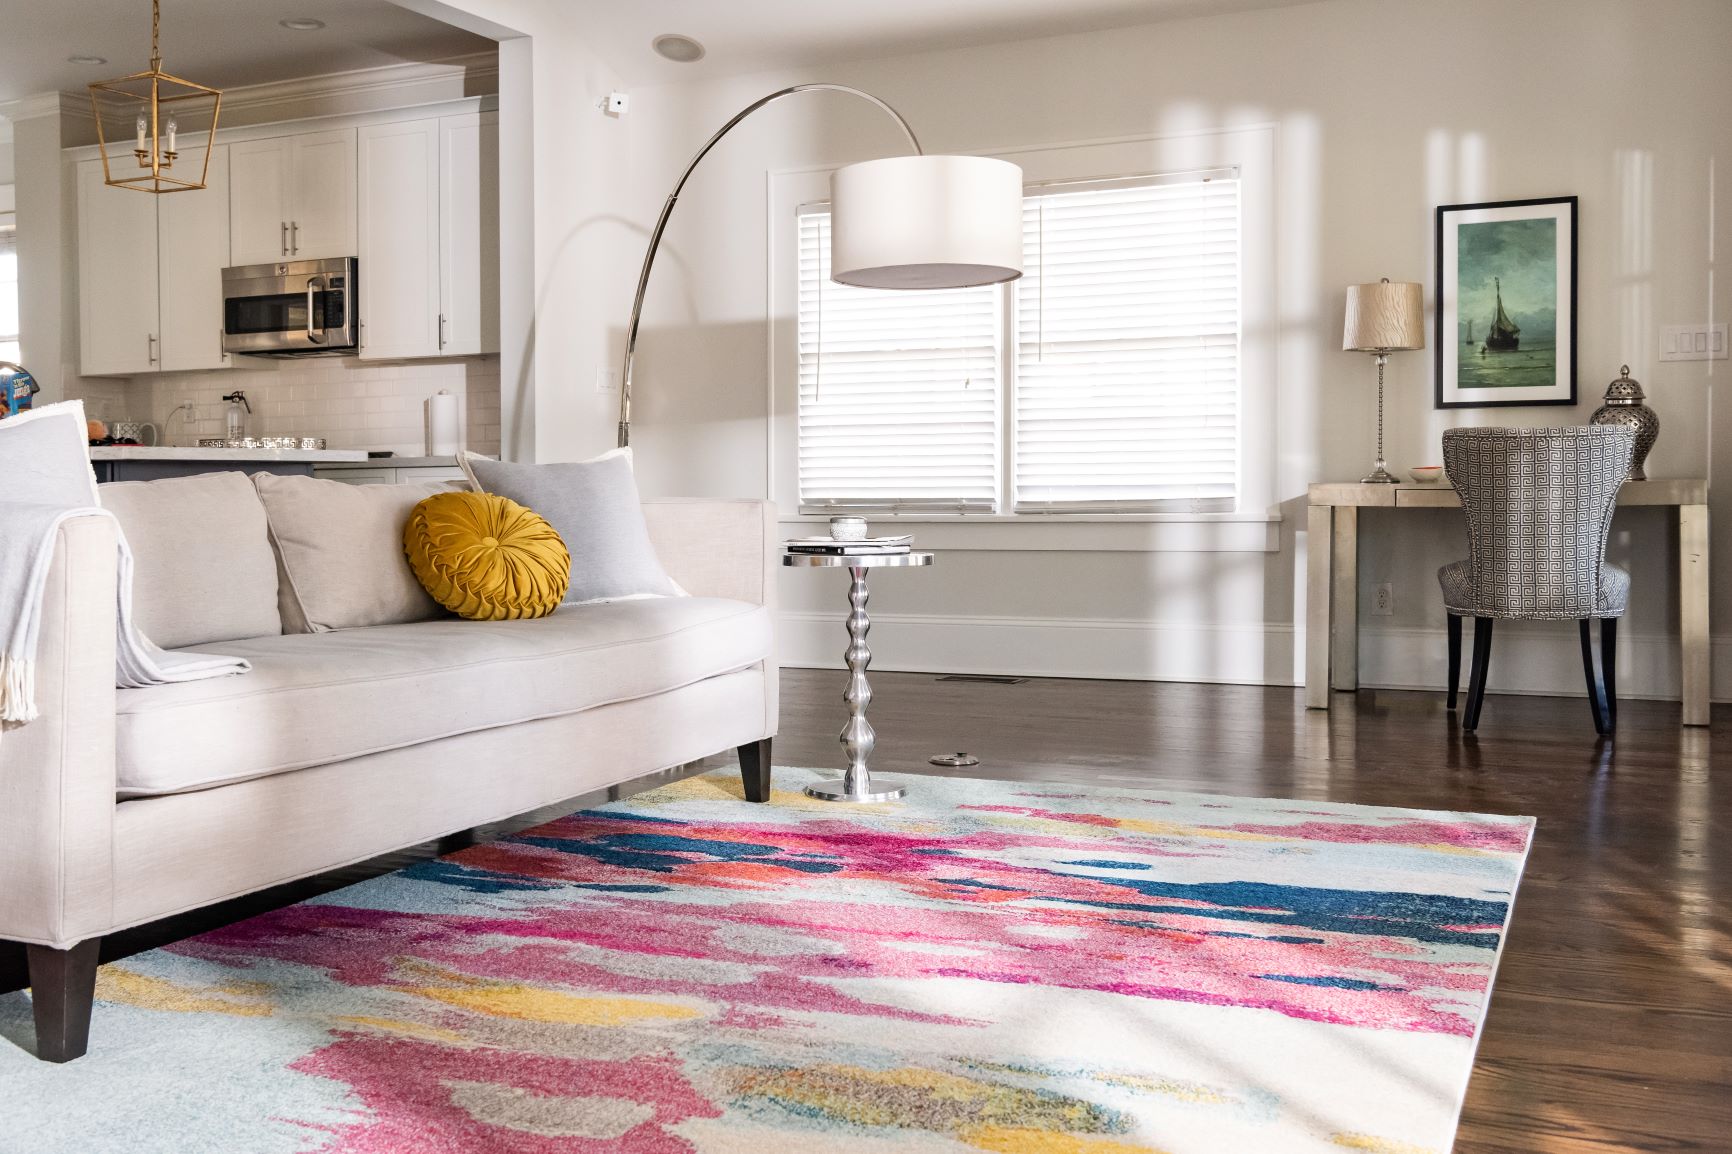 How to Choose The Right Carpet